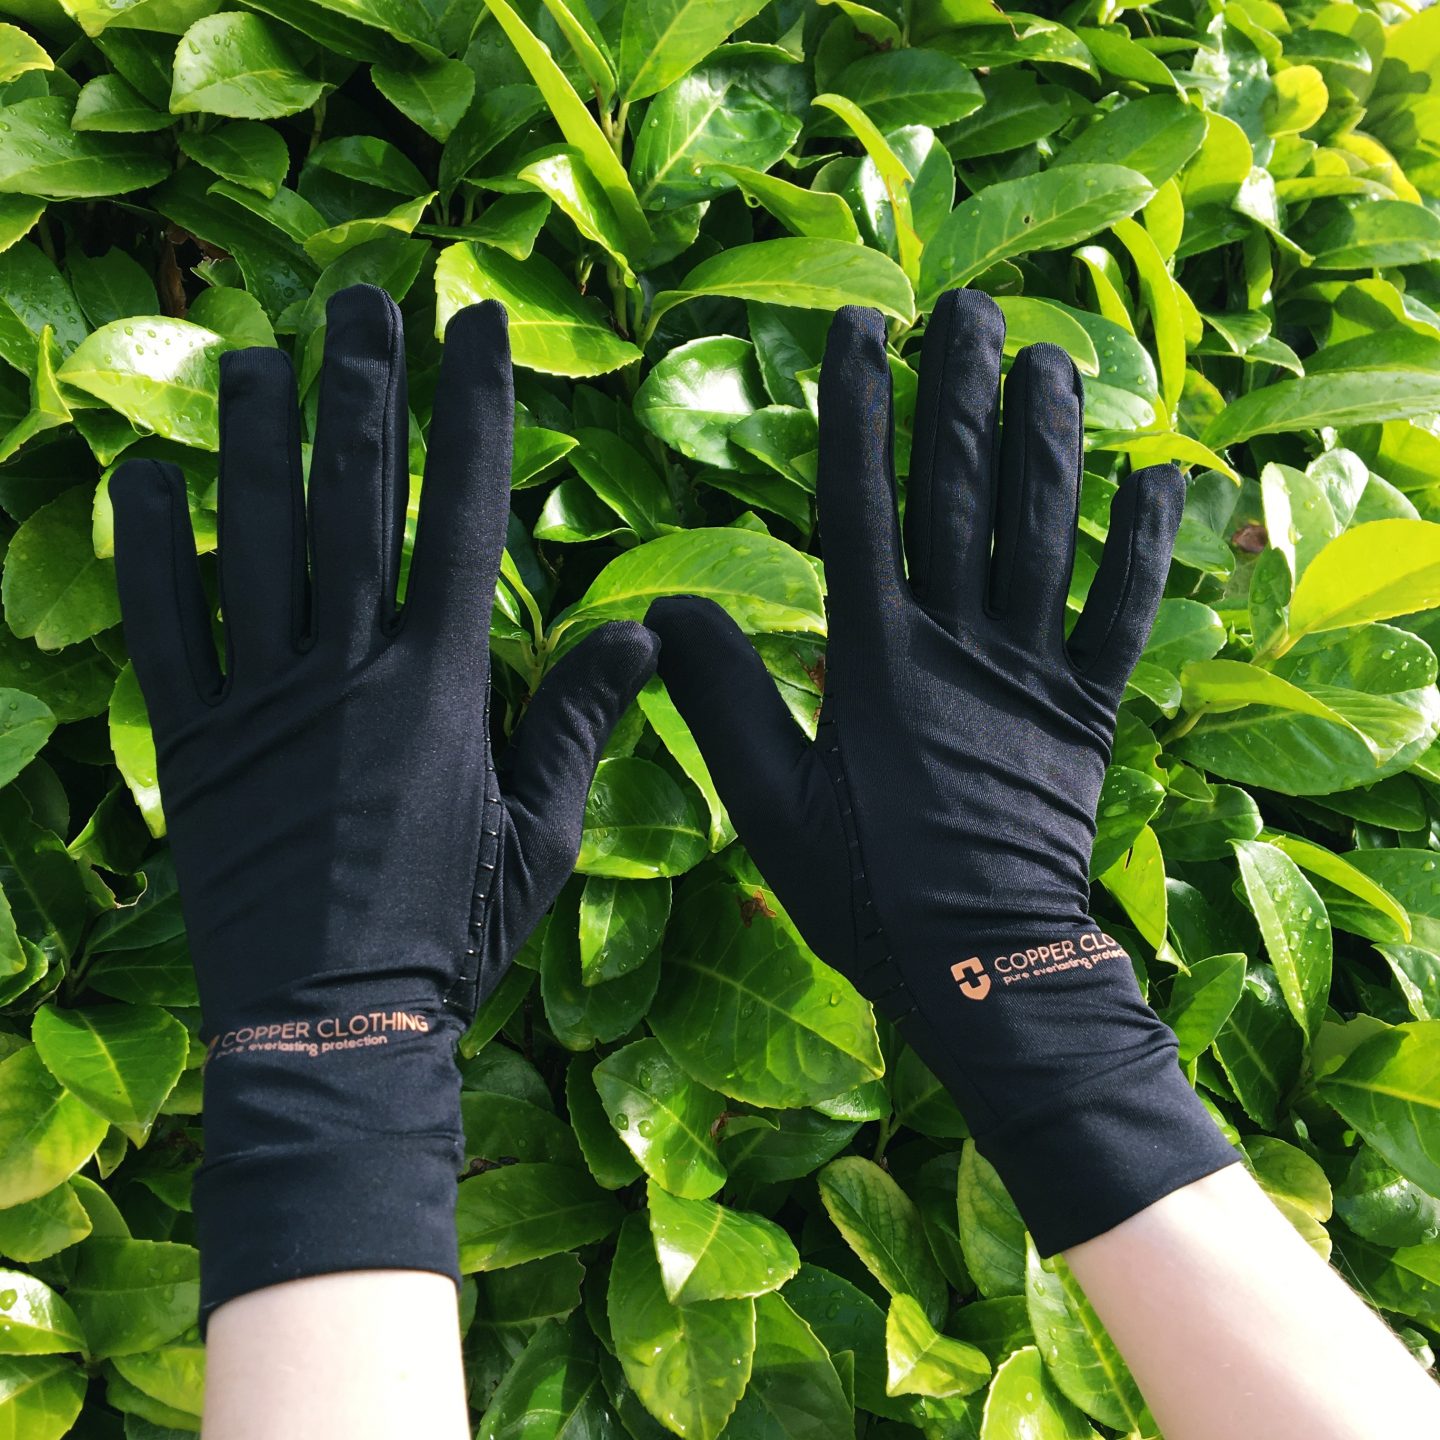 A close-up photo of my hands and forearms. I'm wearing the black Copper Clothing compression gloves I was gifted for this review. My hands are held up with the green leaves of the plant in my garden as the background.